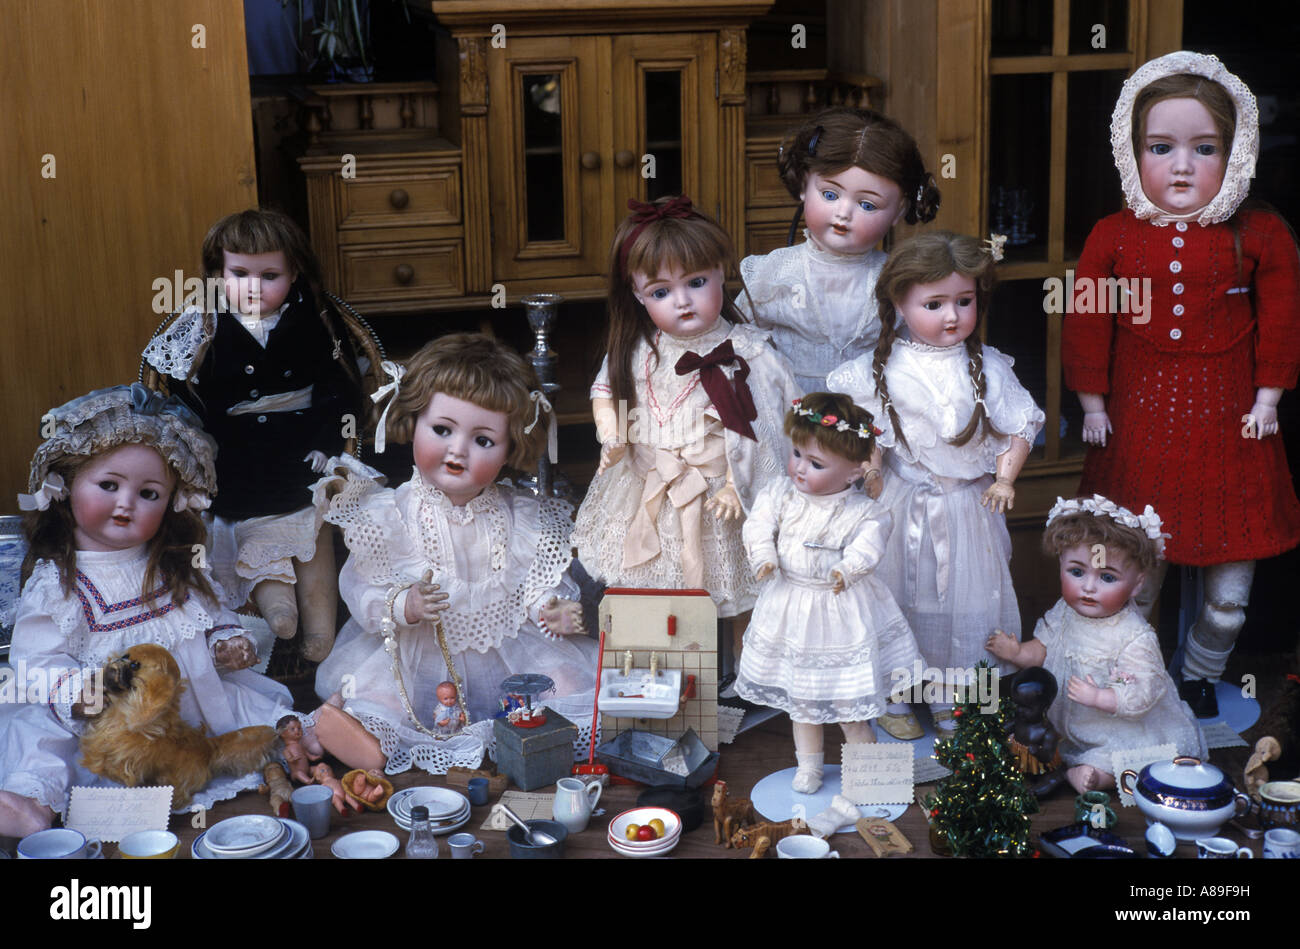 Collection of old dolls. Stock Photo